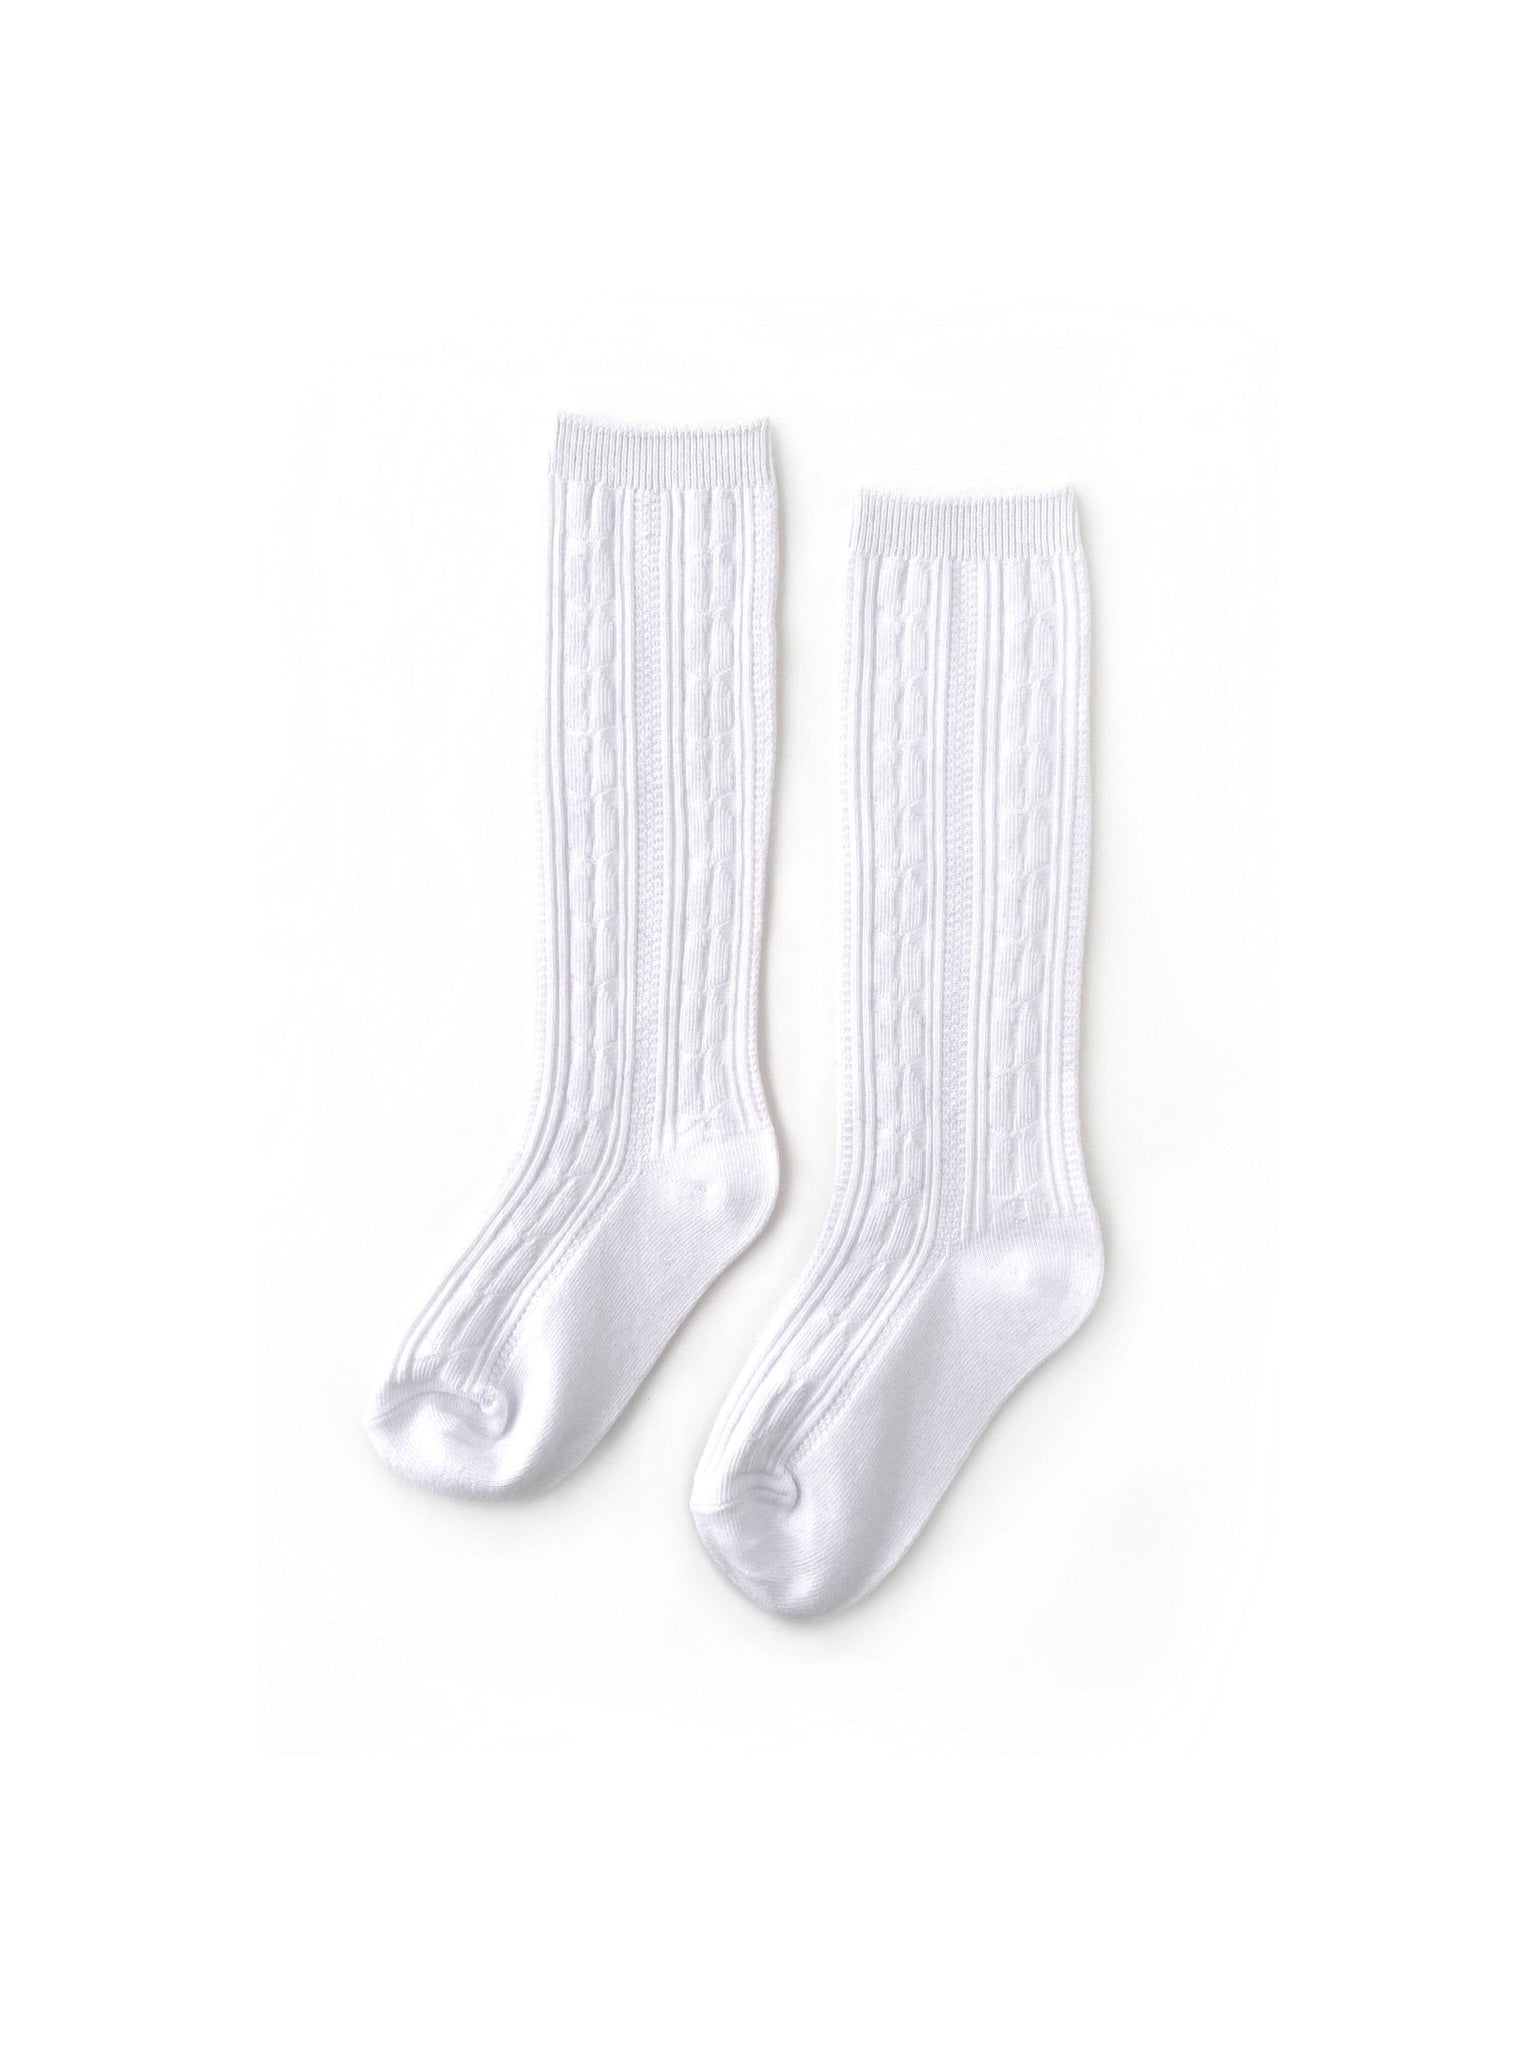 * Cable Knit Knee High Socks